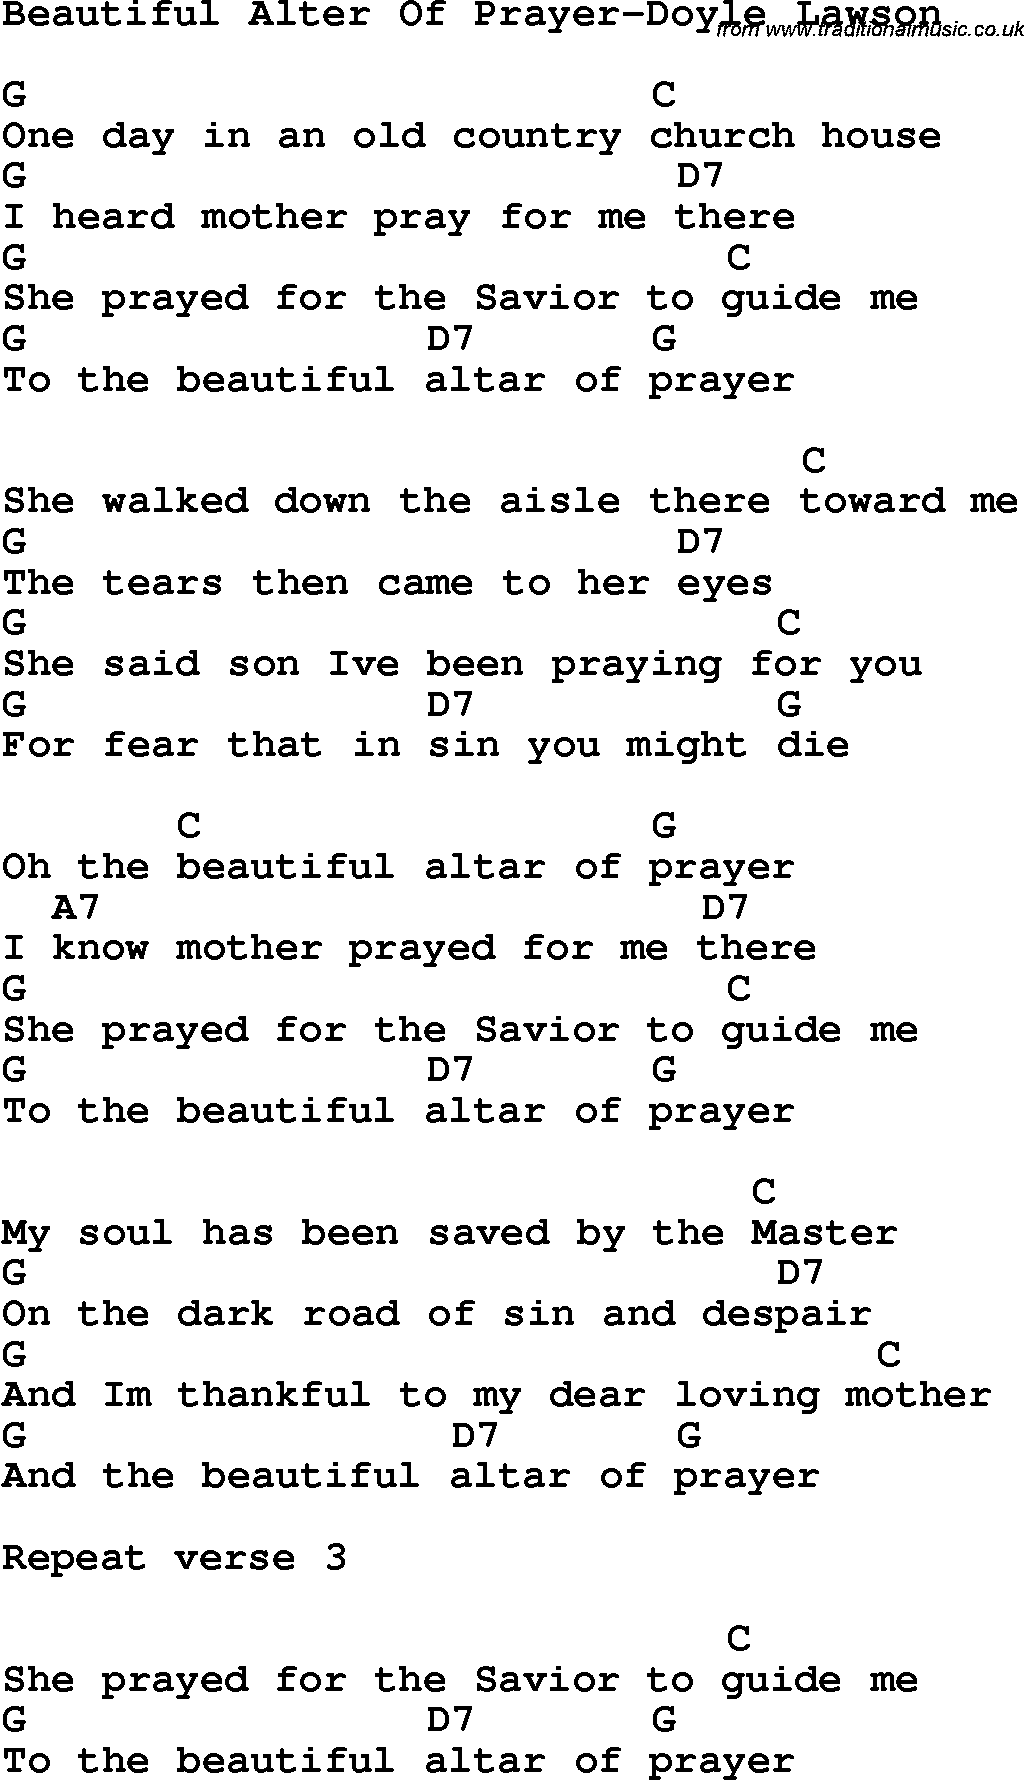 Country, Southern and Bluegrass Gospel Song Beautiful Alter Of Prayer-Doyle Lawson lyrics and chords